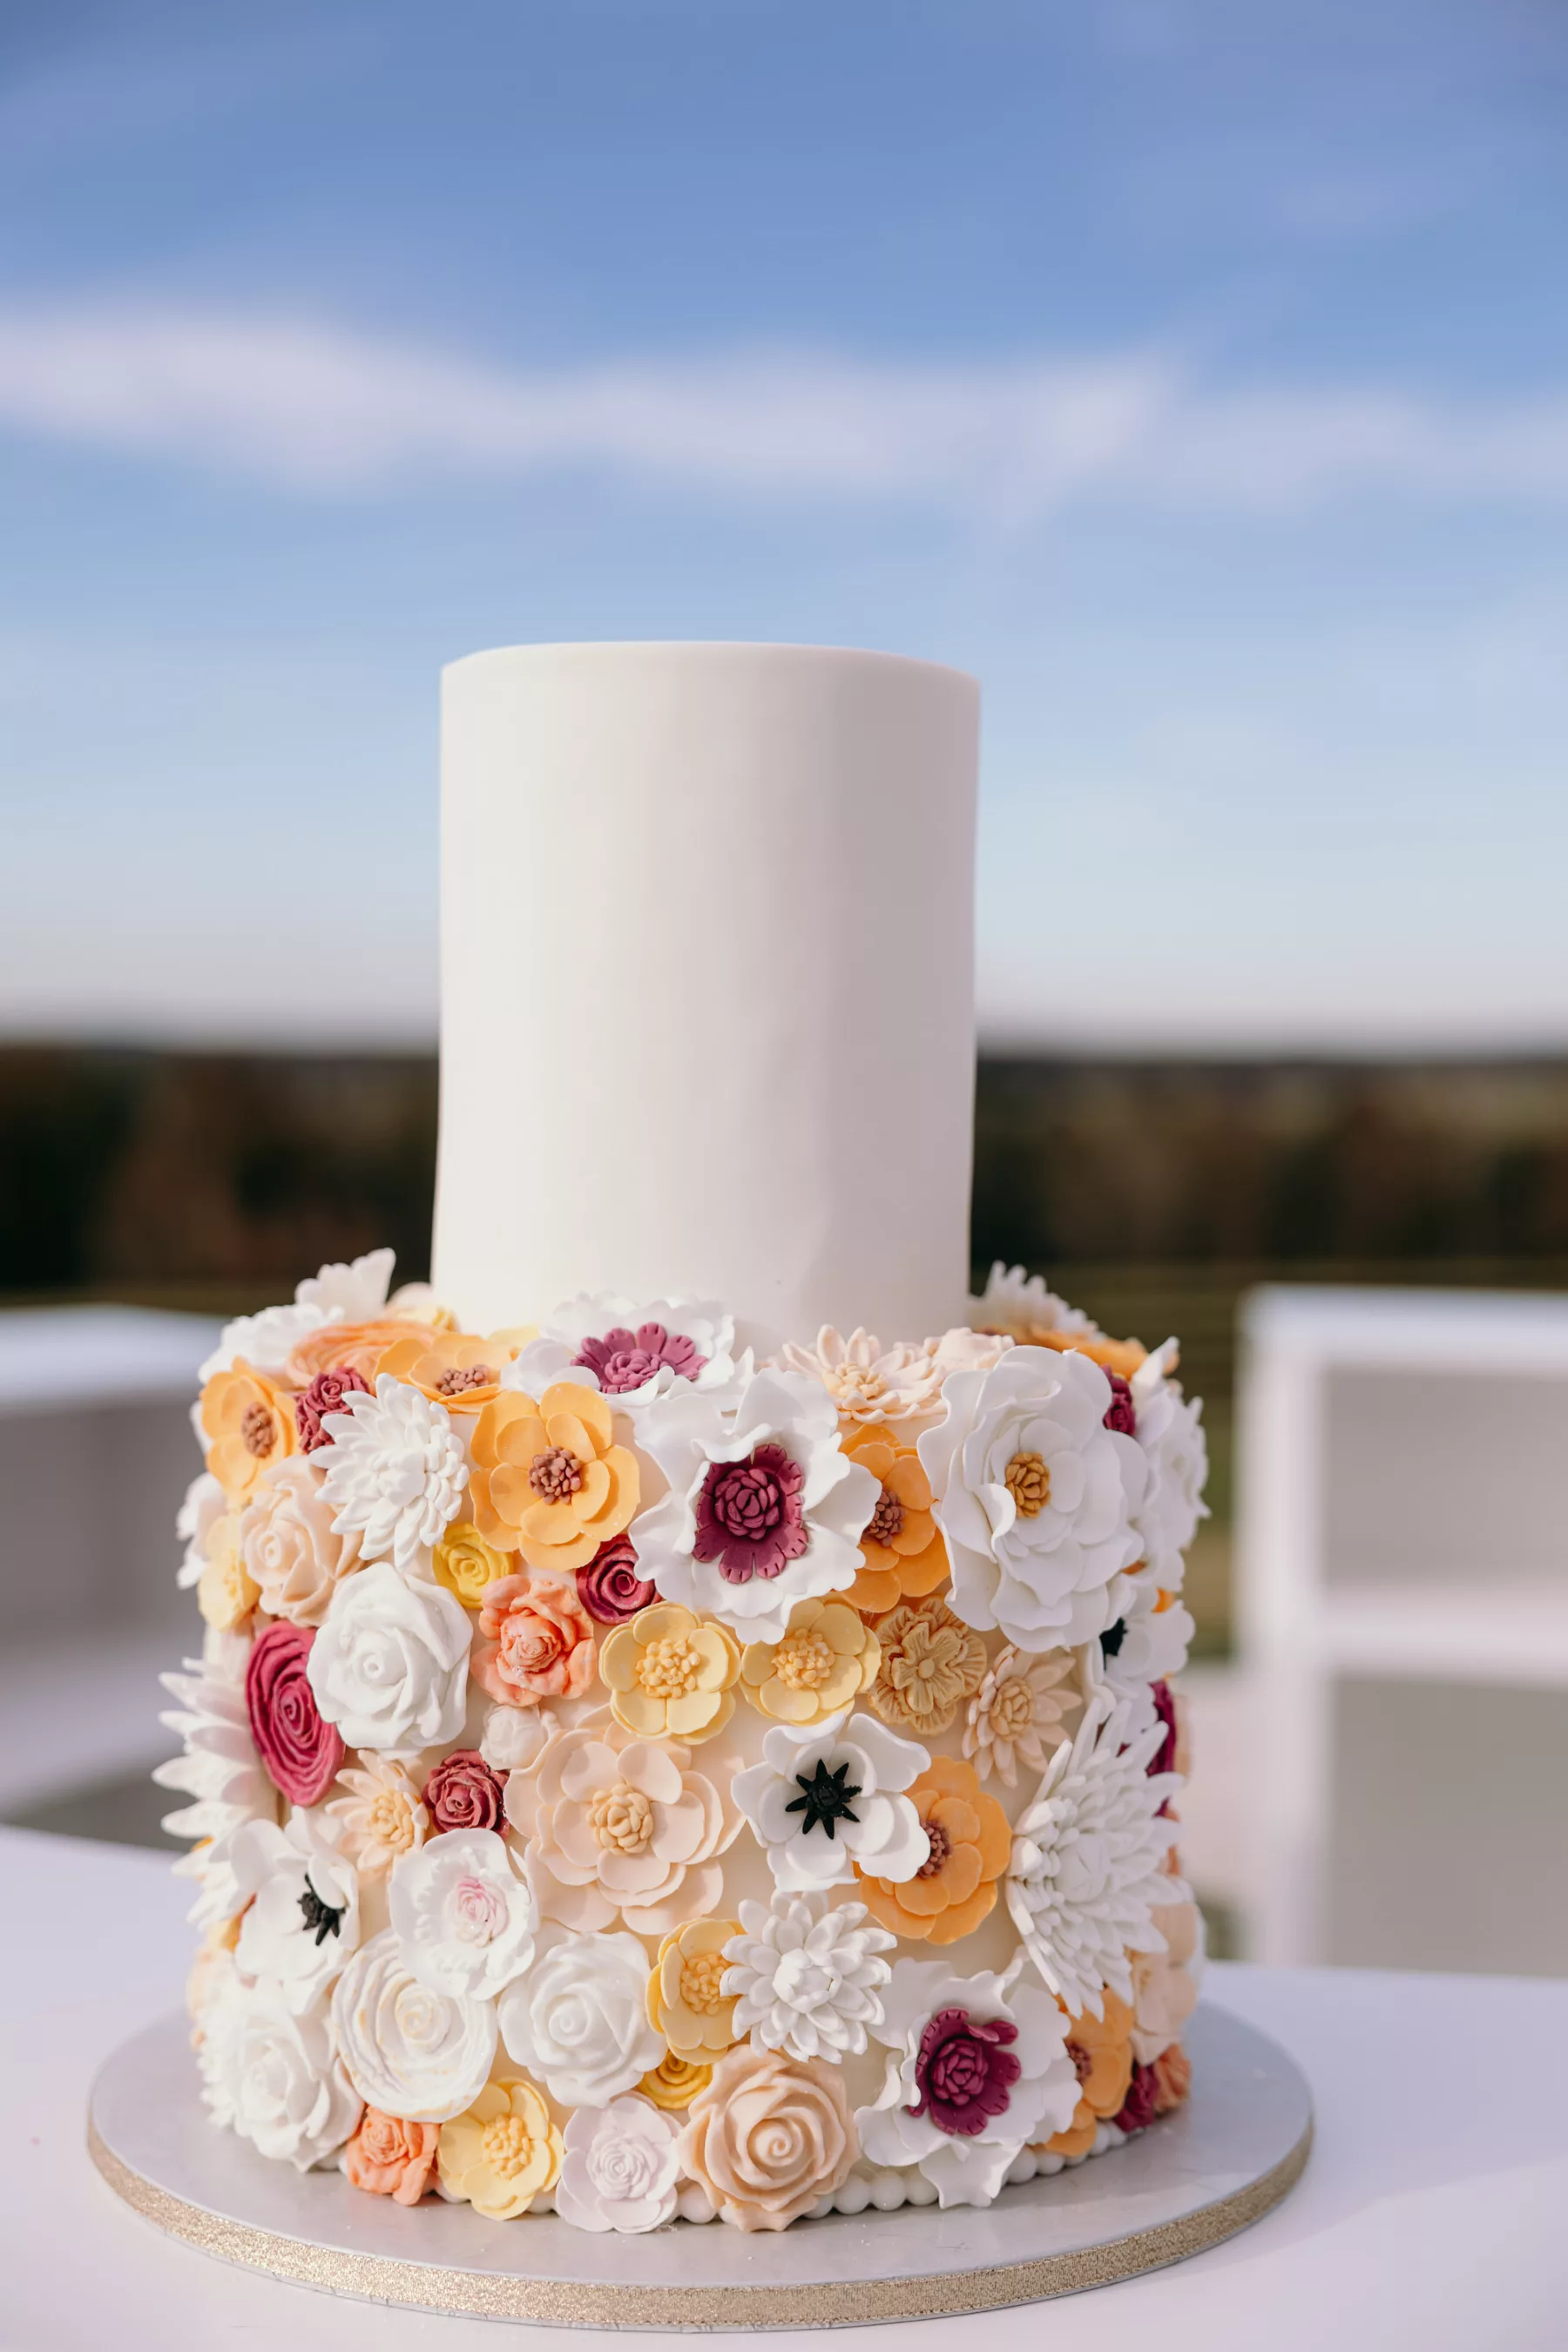 Whimsical Two-Tiered Wedding Cake with Yellow, White, and Mauve Sugar Flowers